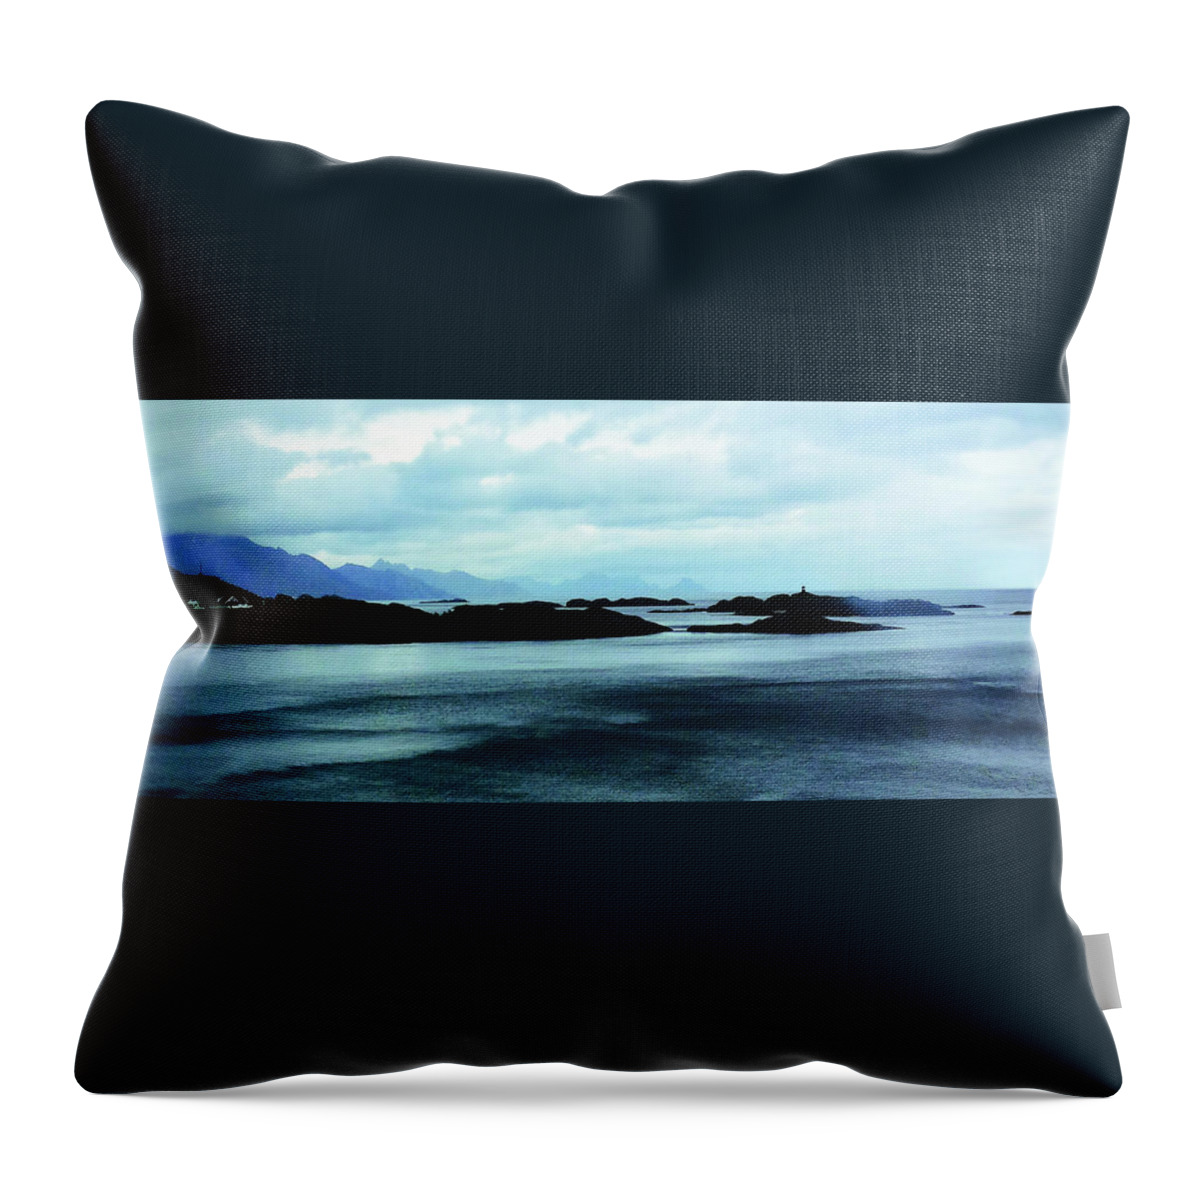 Fjord Throw Pillow featuring the photograph Fjord by Joelle Philibert